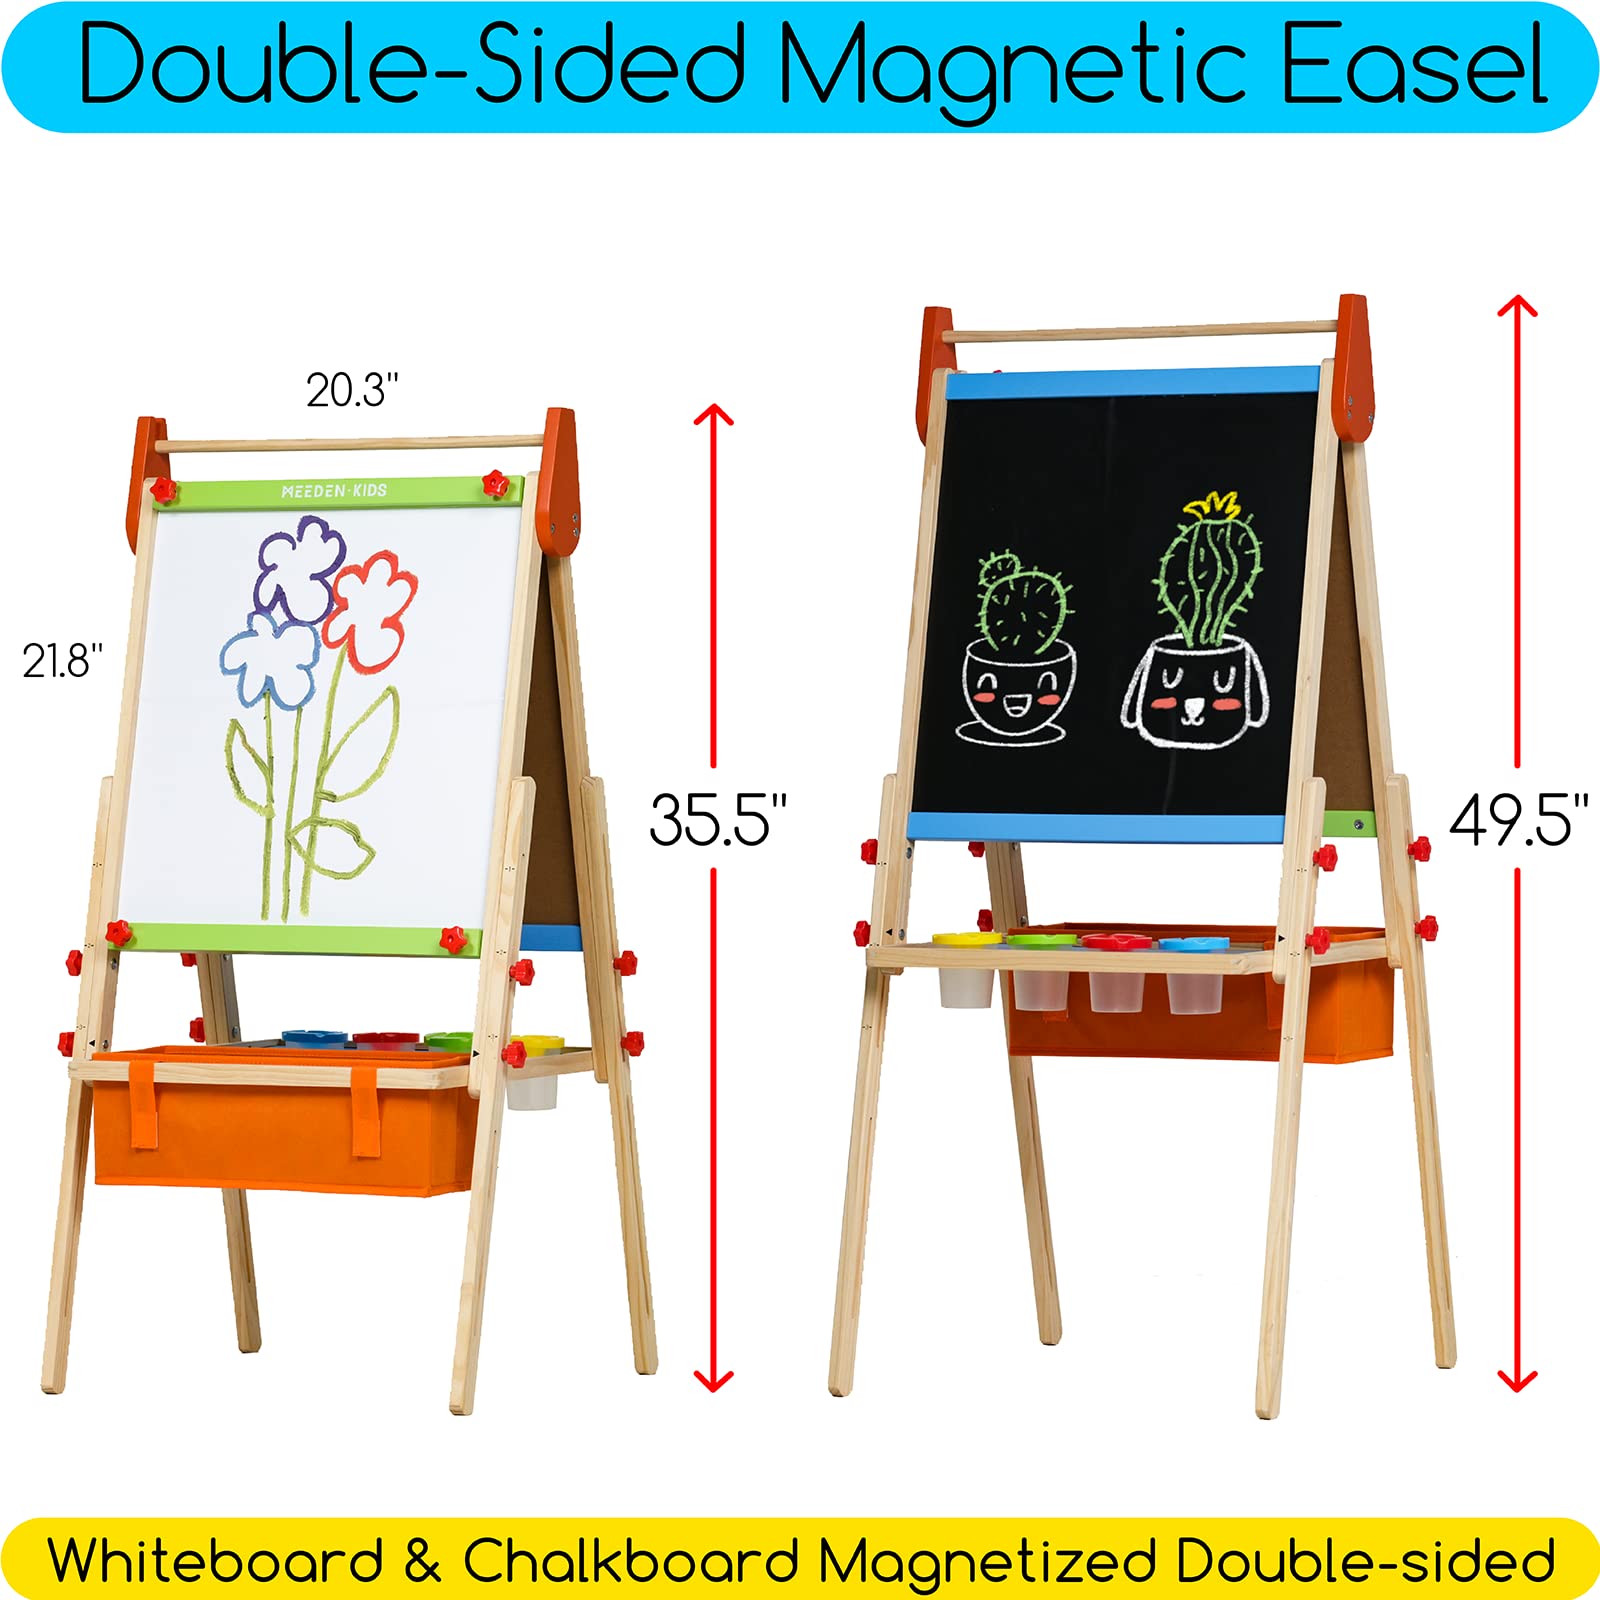 MEEDEN Easel for Kids, Double-Sided All-in-one Wooden Art Easel, Kids Art Easel Set with Paper Rolls, Magnetic Easel with Whiteboard & Chalkboard, Finger Paints, Accessories Easel for Toddlers